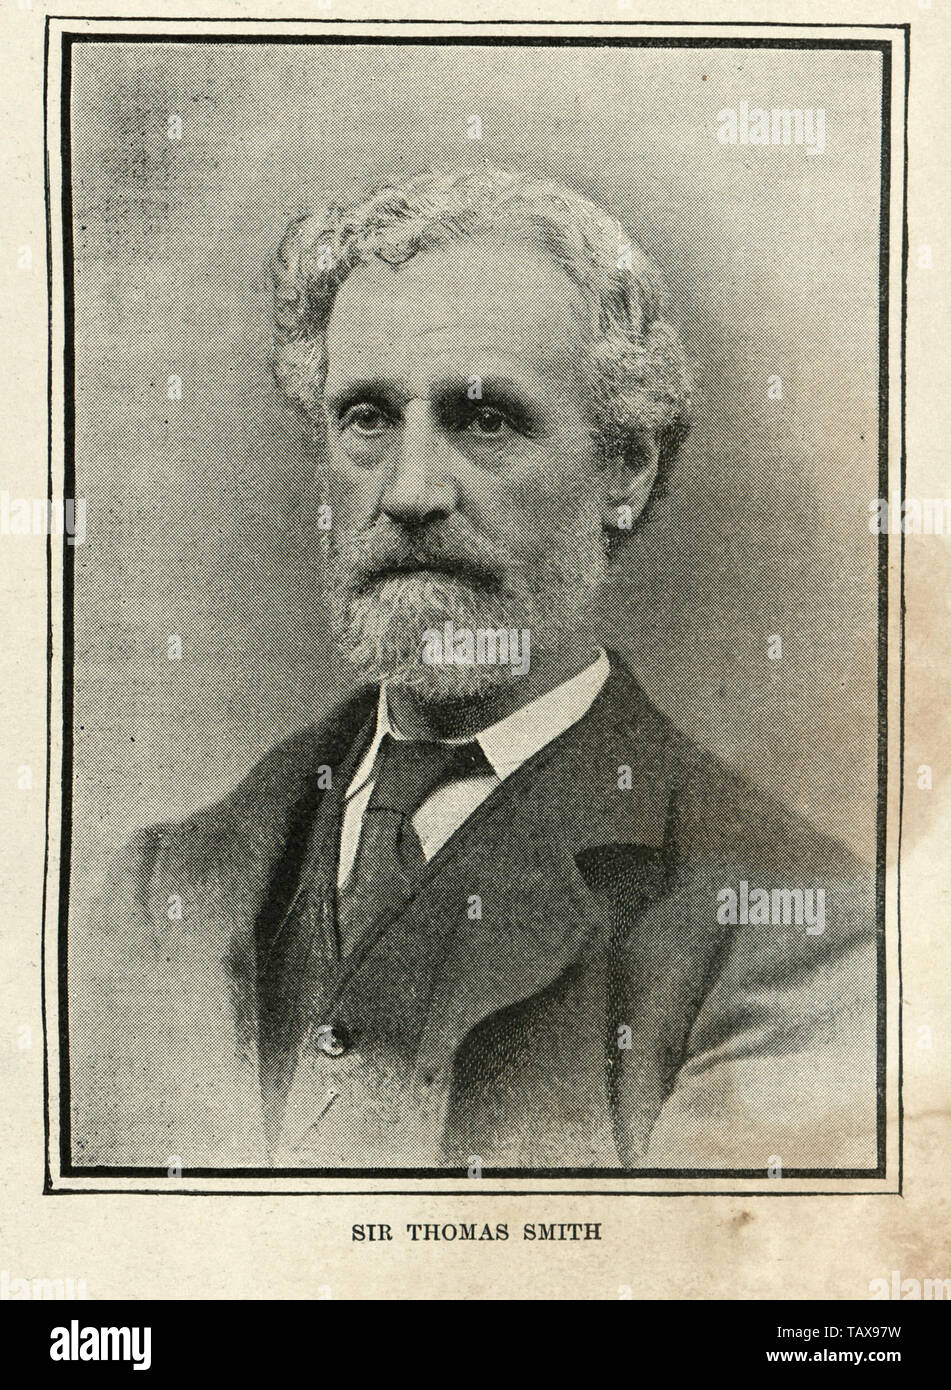 Vintage photograph of Sir Thomas Smith, 1st Baronet, of Stratford Place an eminent British surgeon. He became Surgeon Extraordinary to Queen Victoria in 1895 in succession to Sir William Savory. Stock Photo